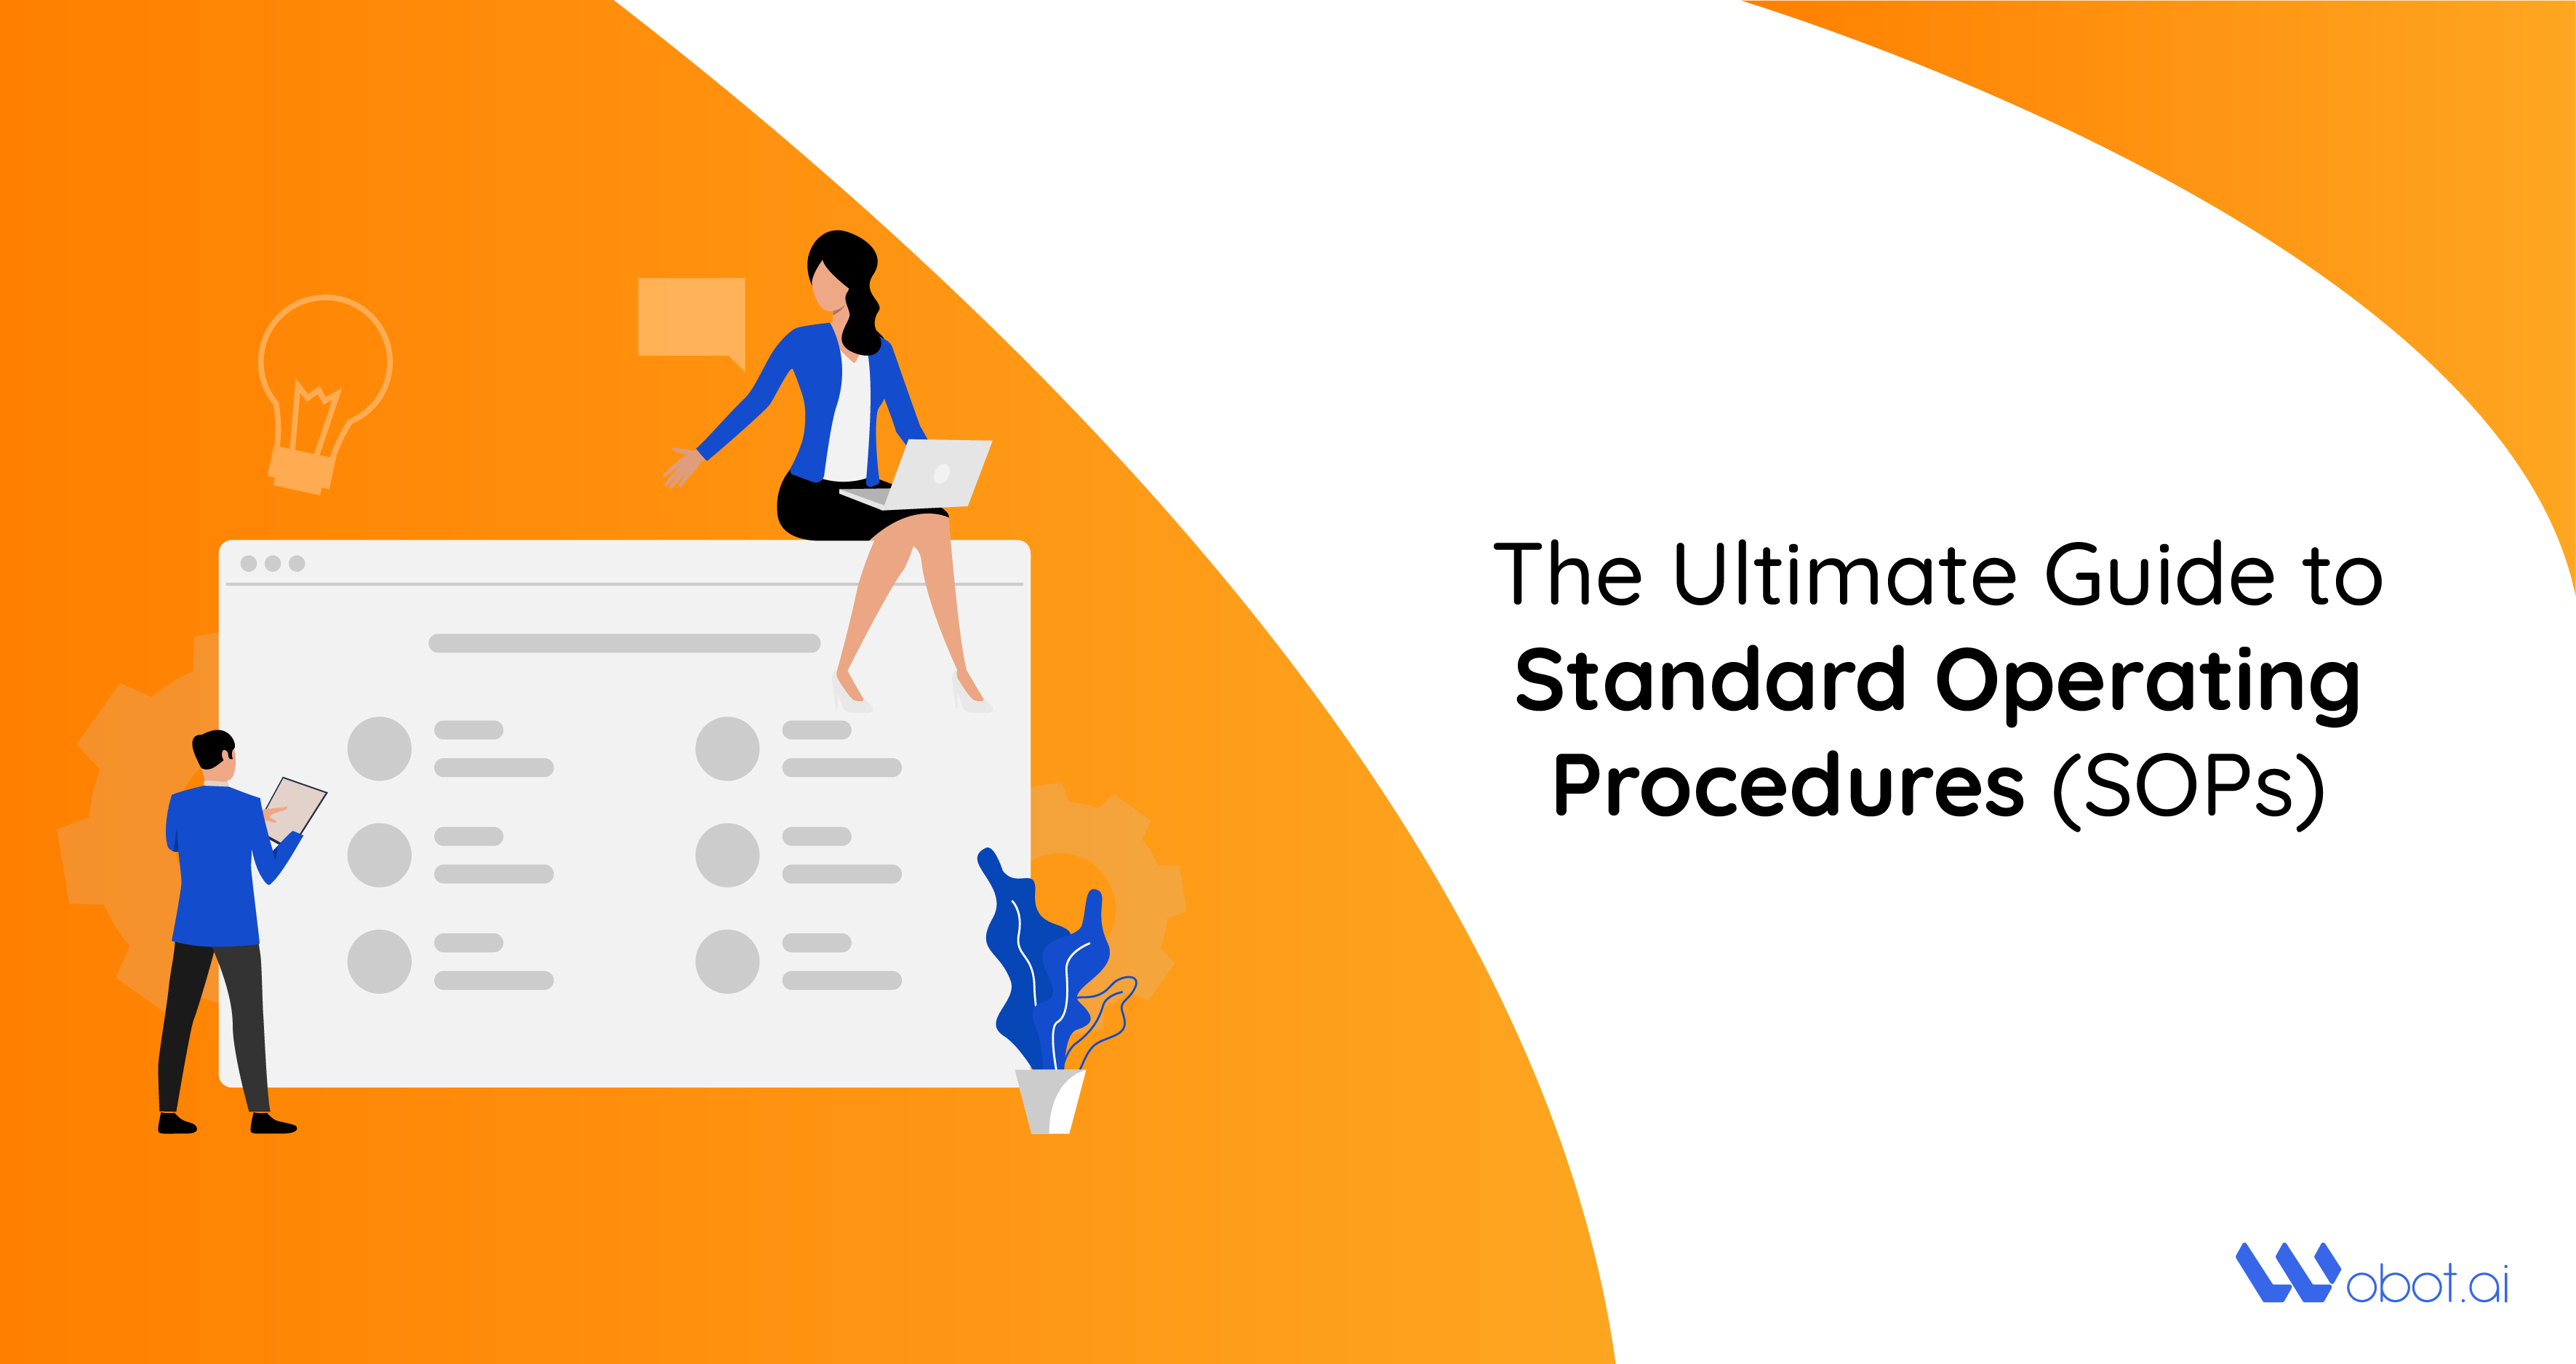 The Ultimate Guide to Standard Operating Procedures